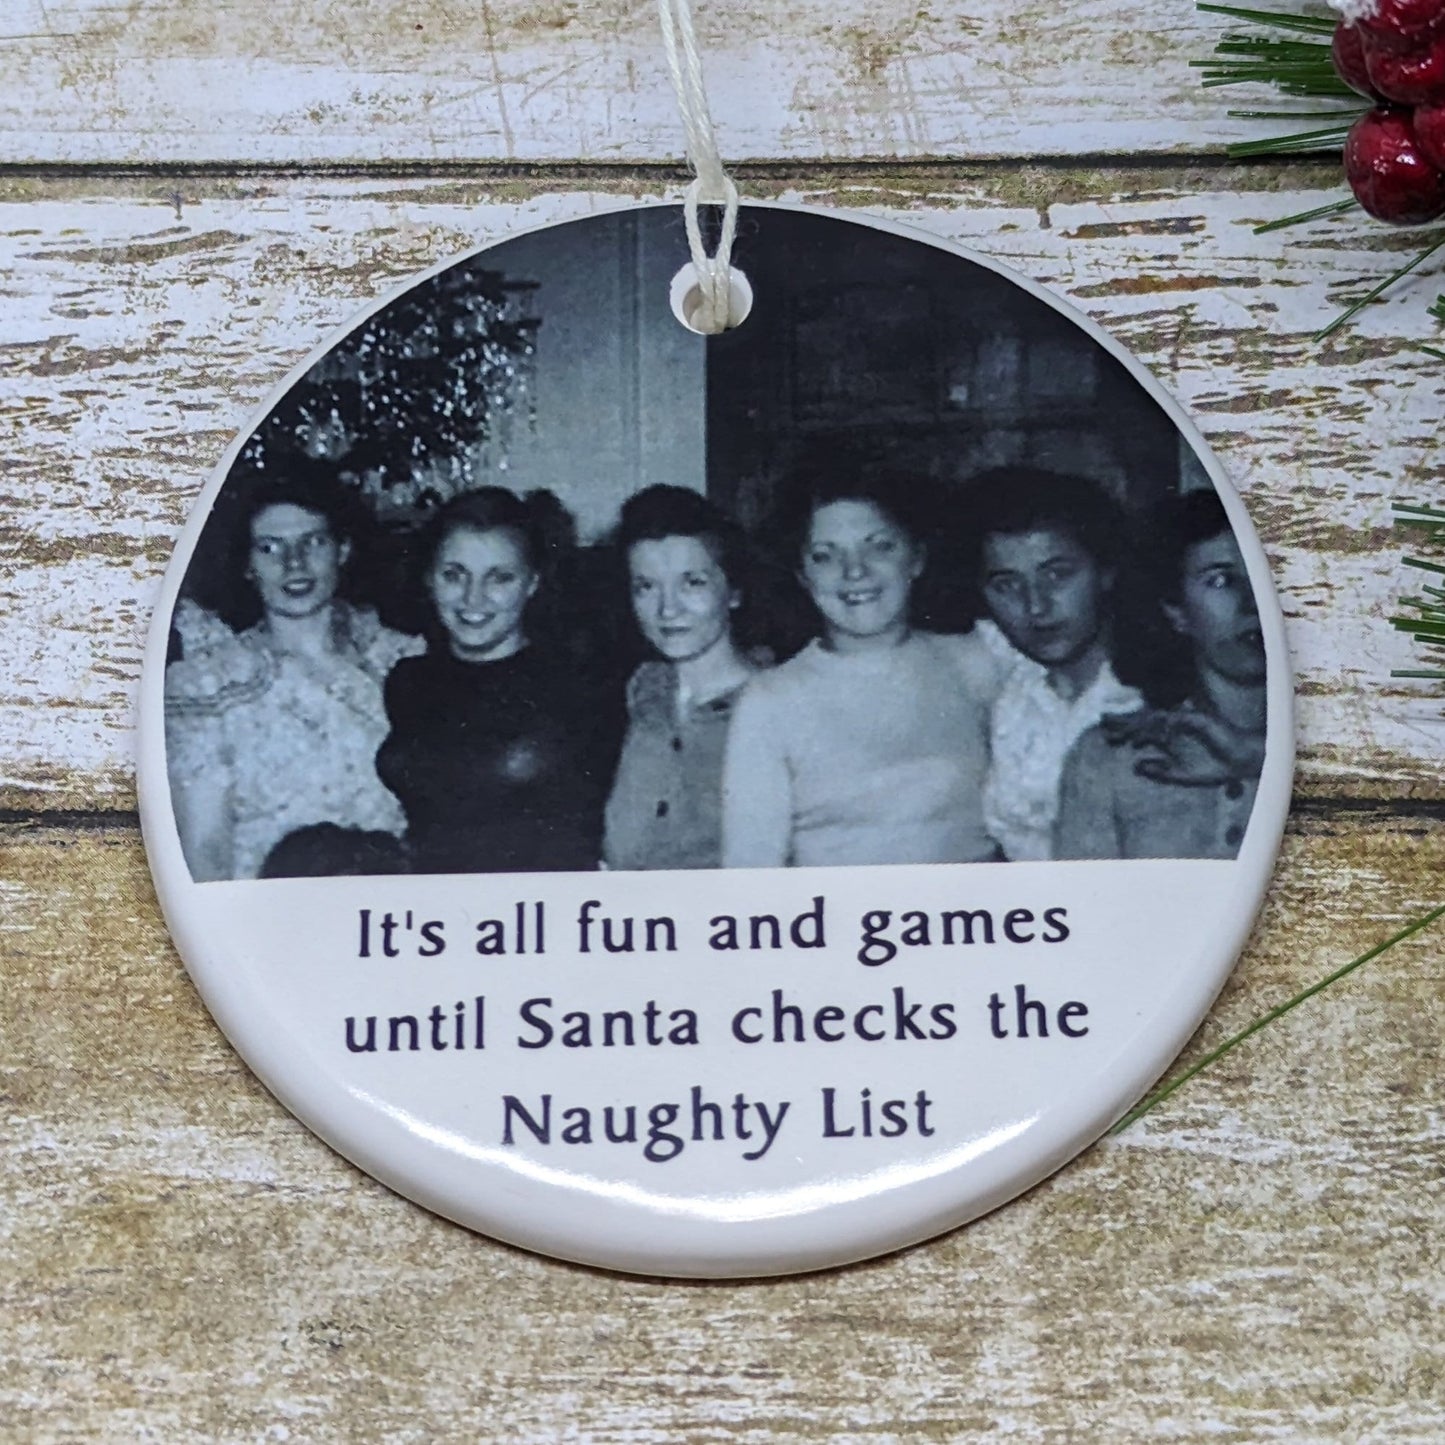 Ornament Snarky, Funny, Wine, Naughty List Christmas Ornament, Snarky Ornament, Vintage Style Ornament - 5 design choices